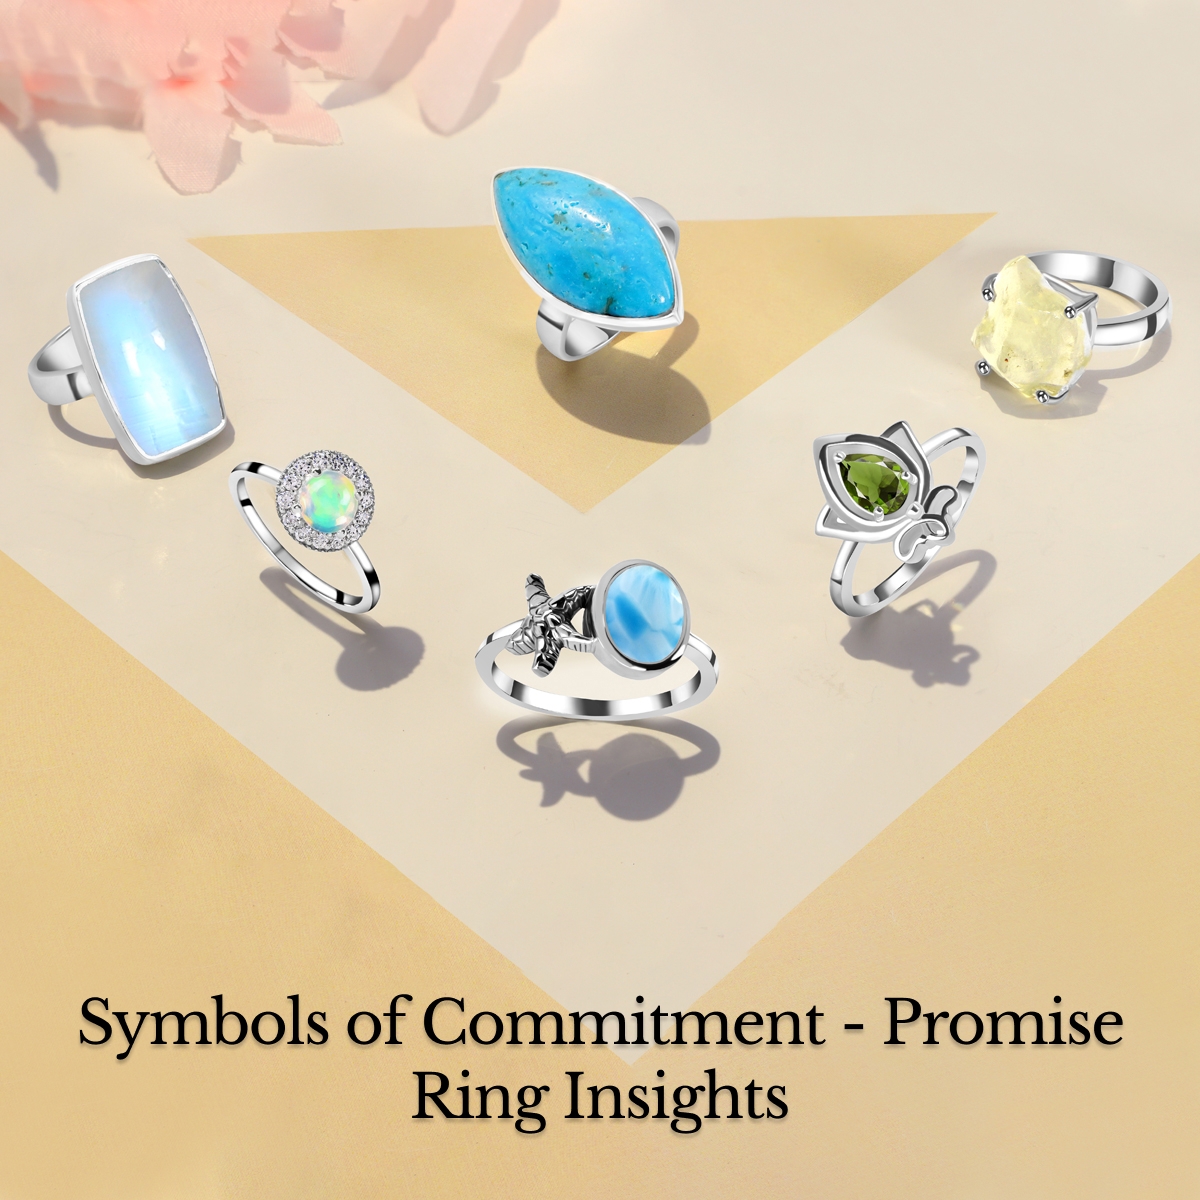 What Is Promise Ring - The Meaning & Purpose